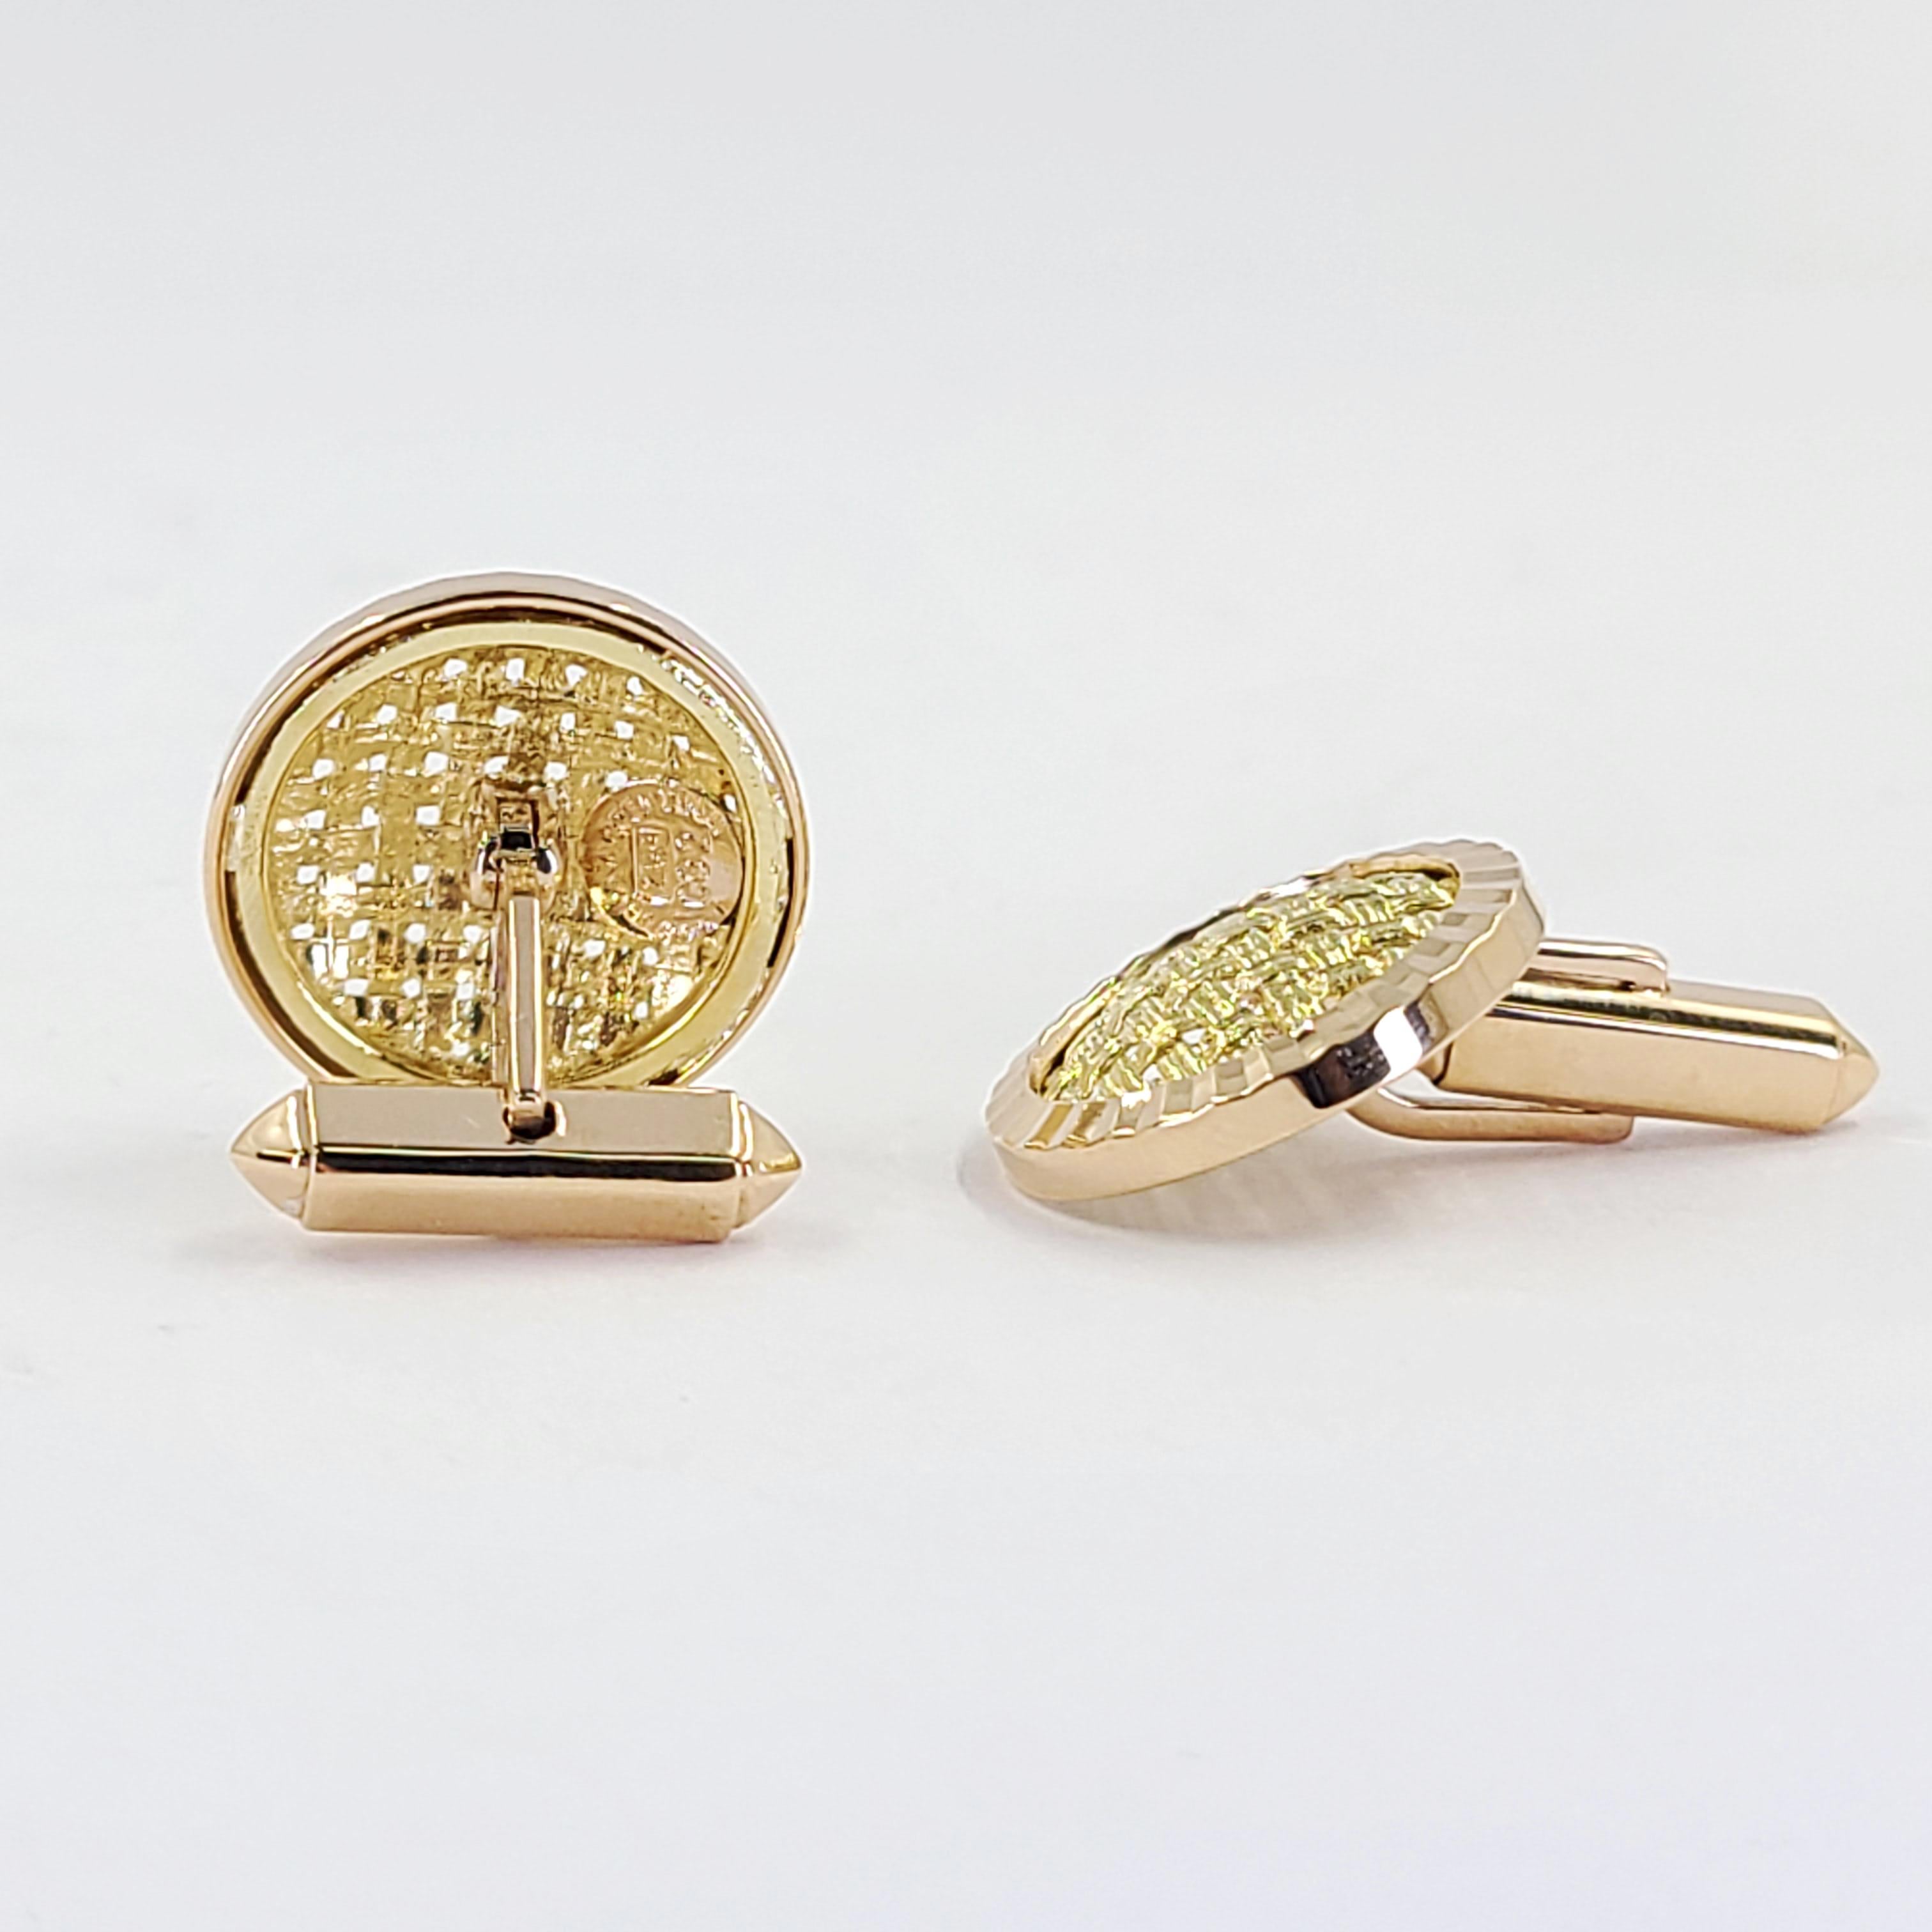 Yellow Gold Basketweave Cufflinks In Good Condition For Sale In Coral Gables, FL